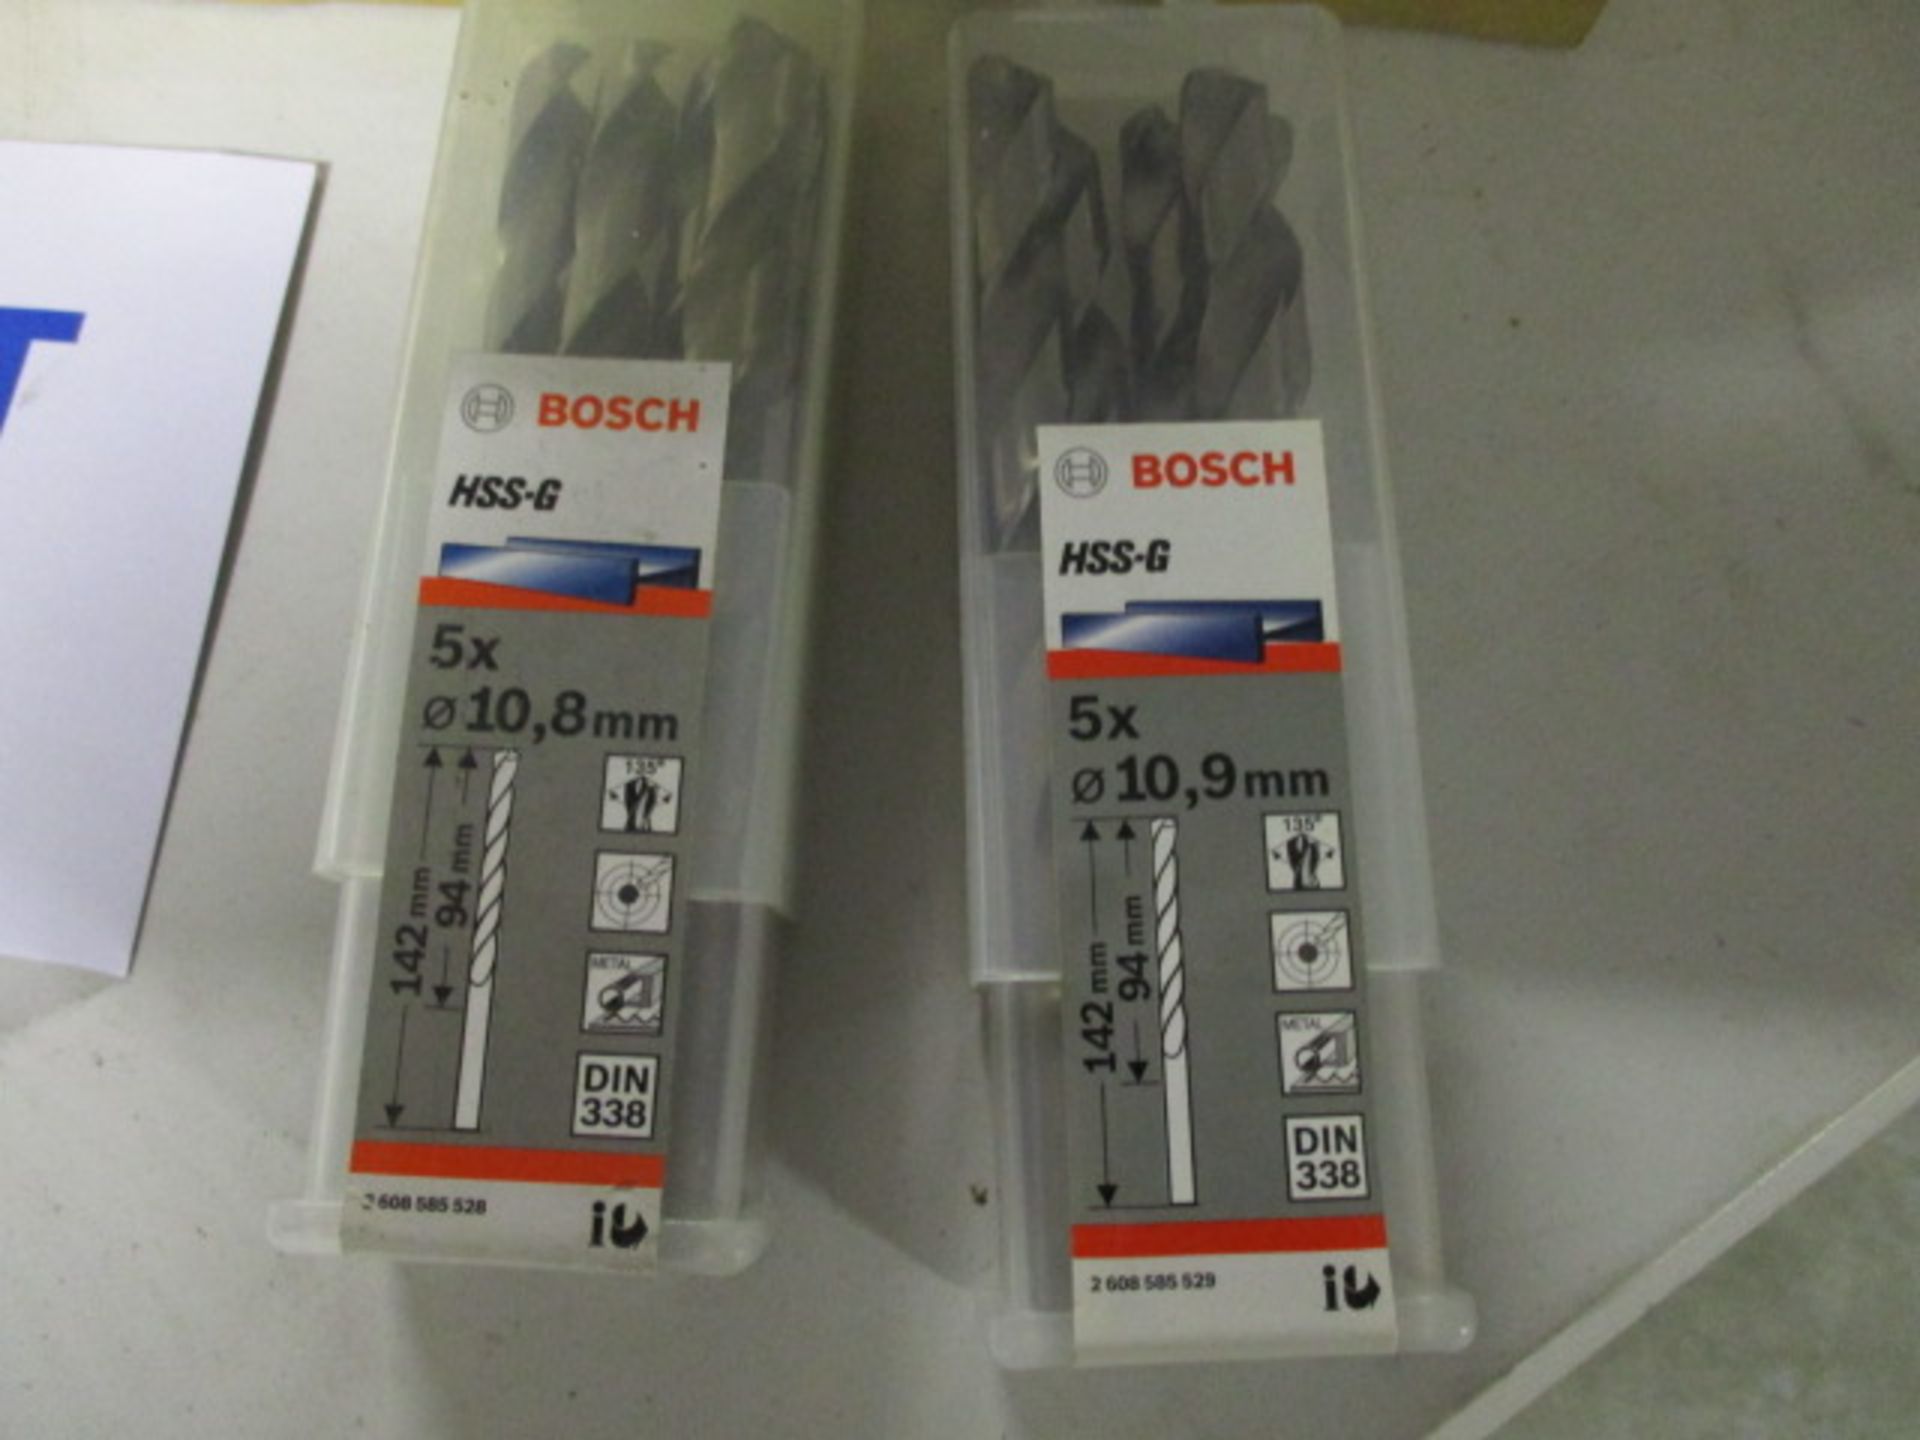 (40) Assorted Bosch HSS-G, D338 Jobber Drills; Retail packed (Unused) - Image 2 of 3